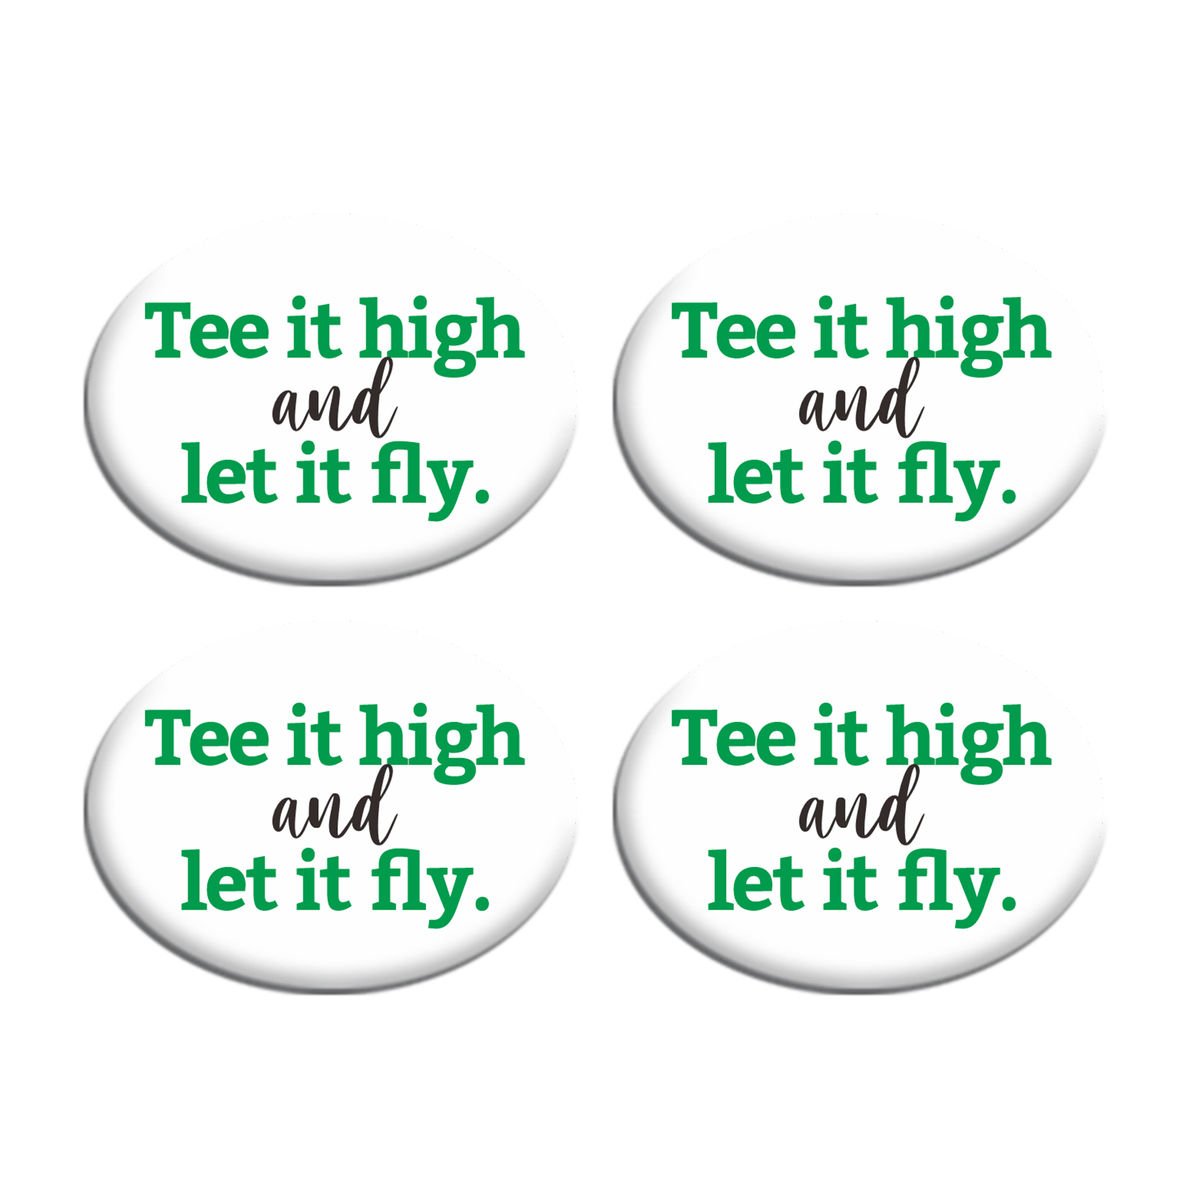 Tee high let it fly